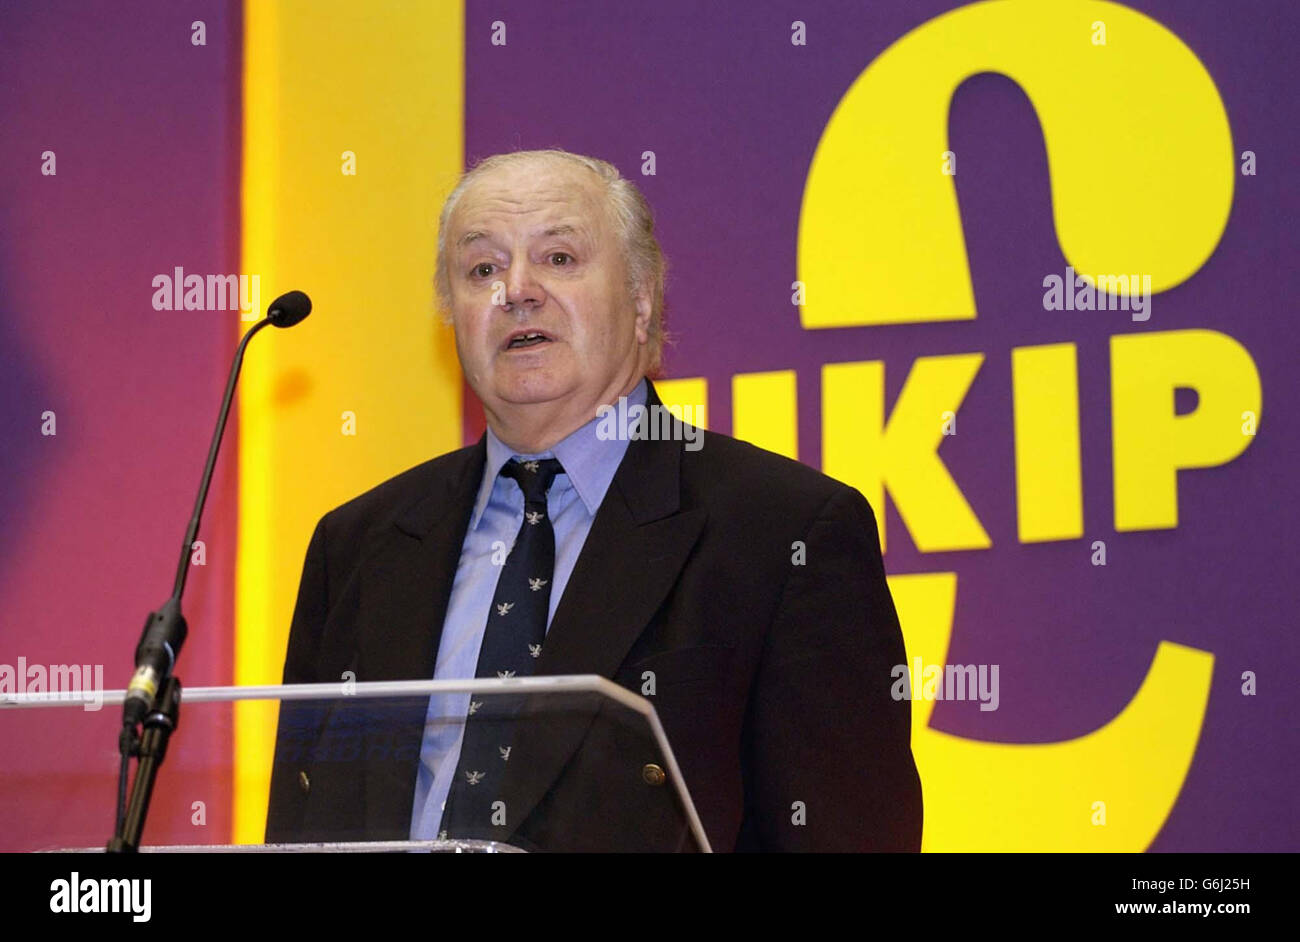 Farmer Tony Martin delivers his speech during the UK Independence Party 'Freedom Conference' at The Emmanuel Centre, Marsham Street, London. The Norfolk farmer jailed for killing a teenage burglar, was addressing delegates at the UK Independence Party s annual conference. Stock Photo